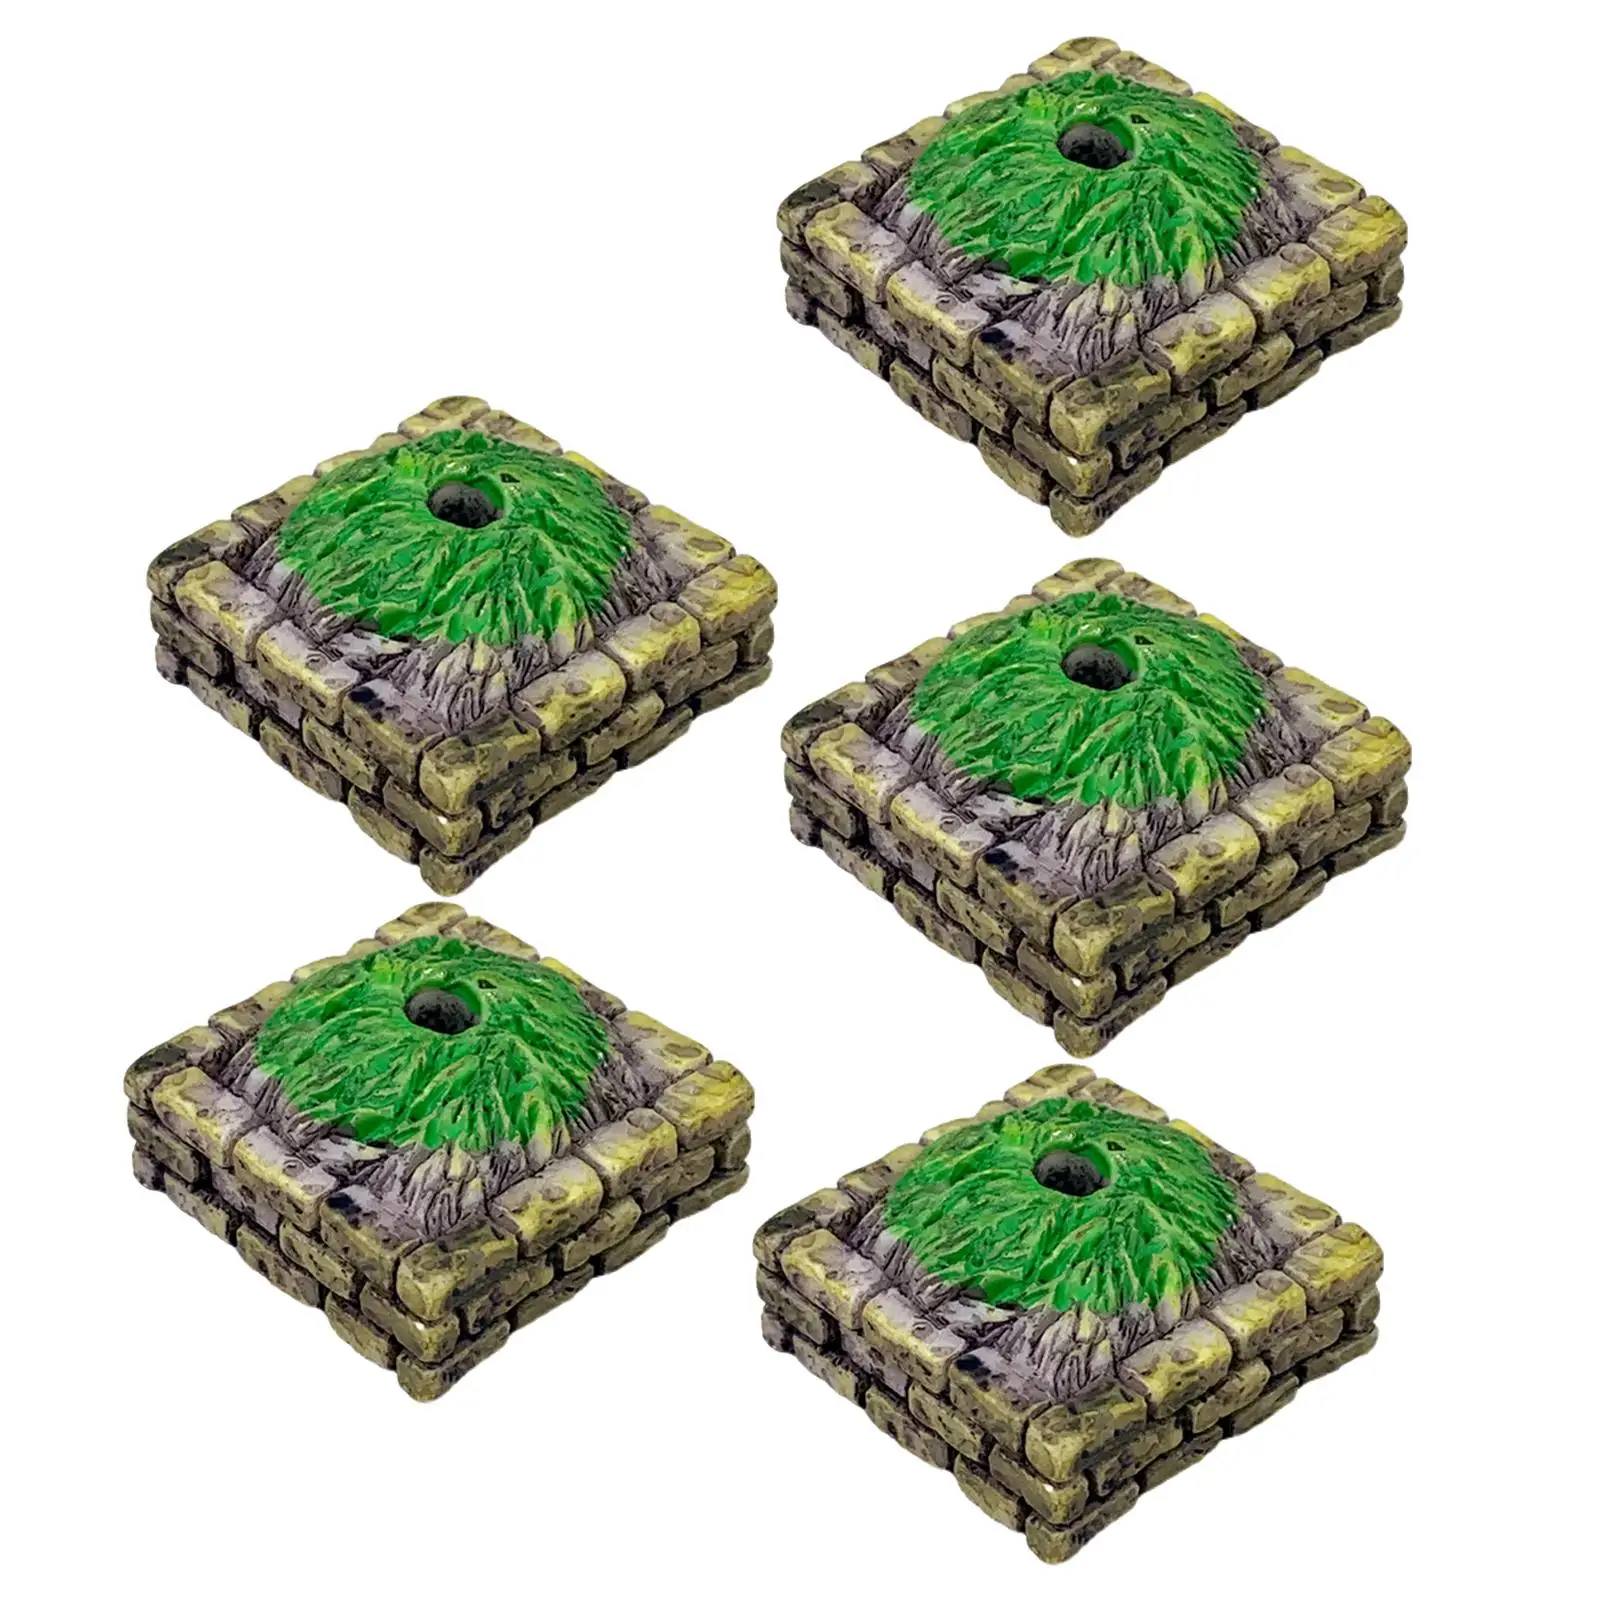 5 Pieces Flower Beds Model DIY Material Gifts for Sand Table Micro Landscape